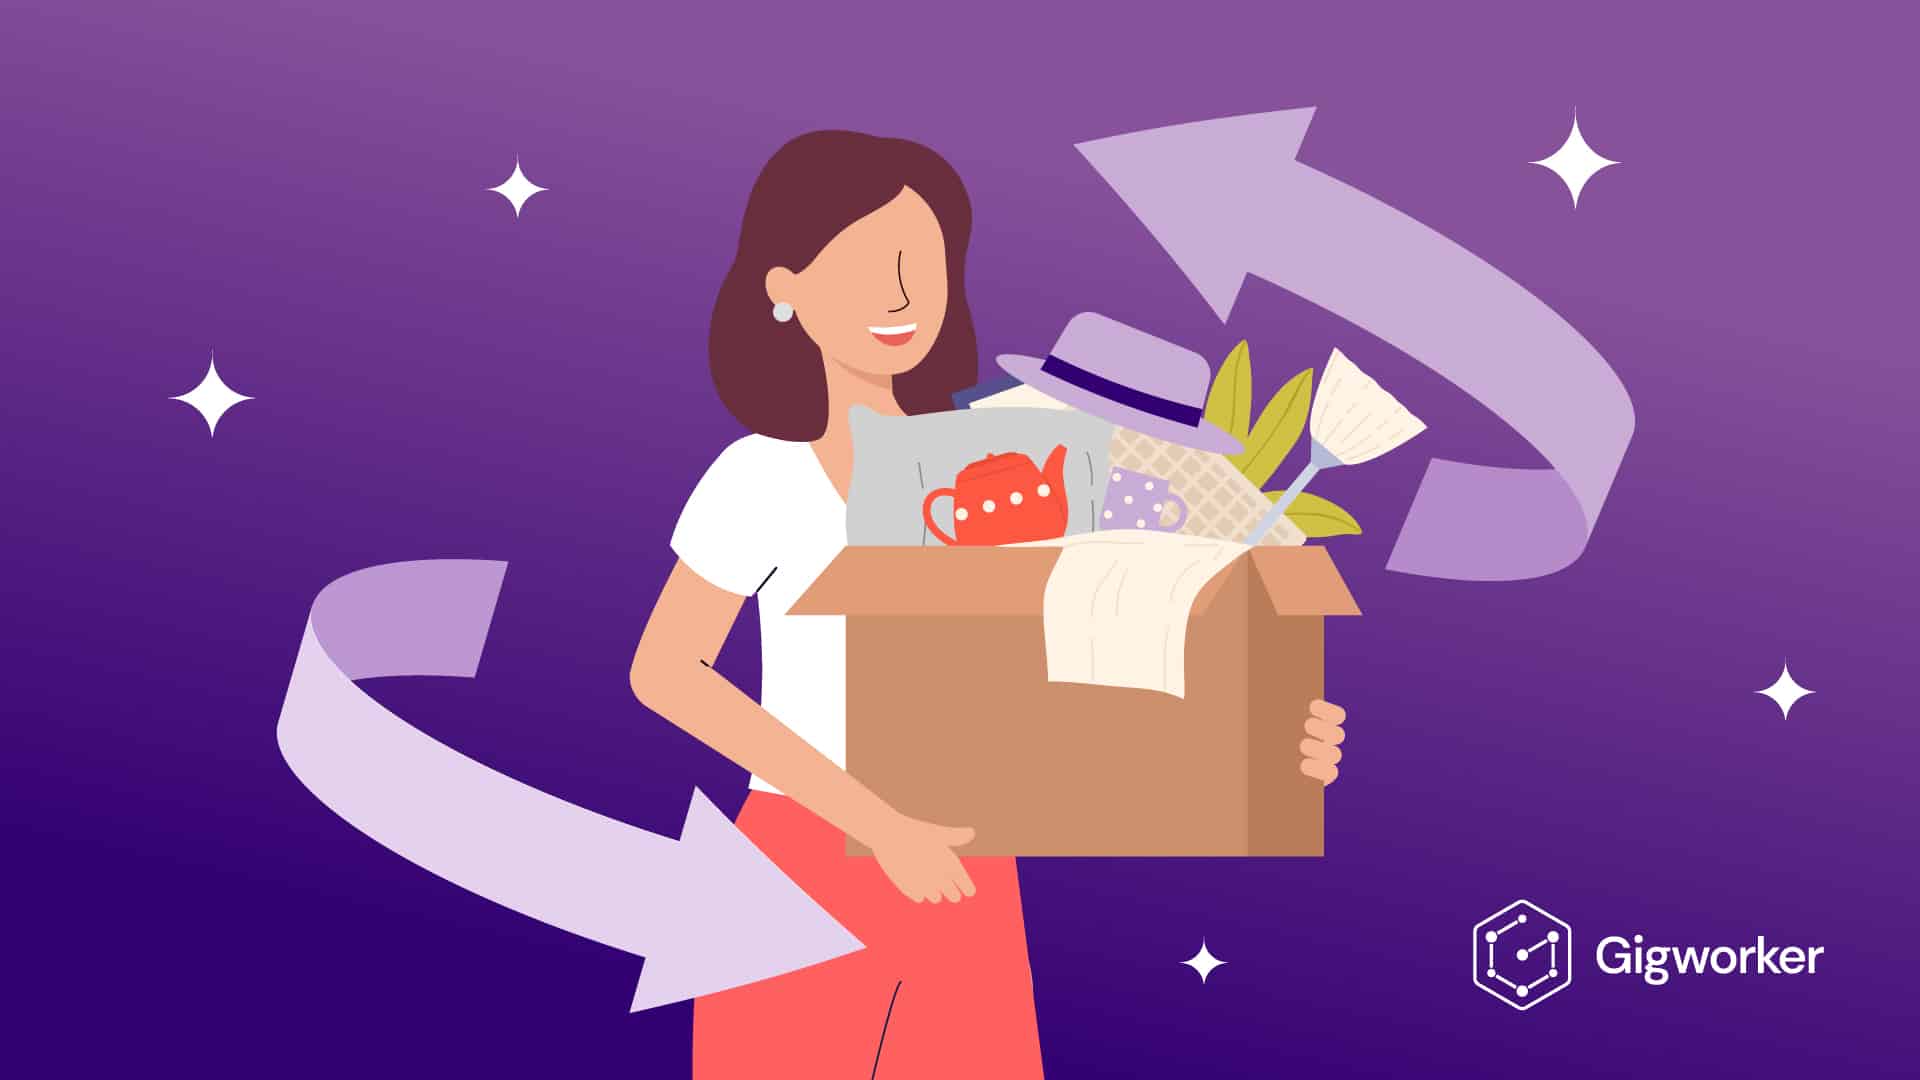 vector graphic showing an illustration of a woman carrying items on a box graphics related to how to start a resell business